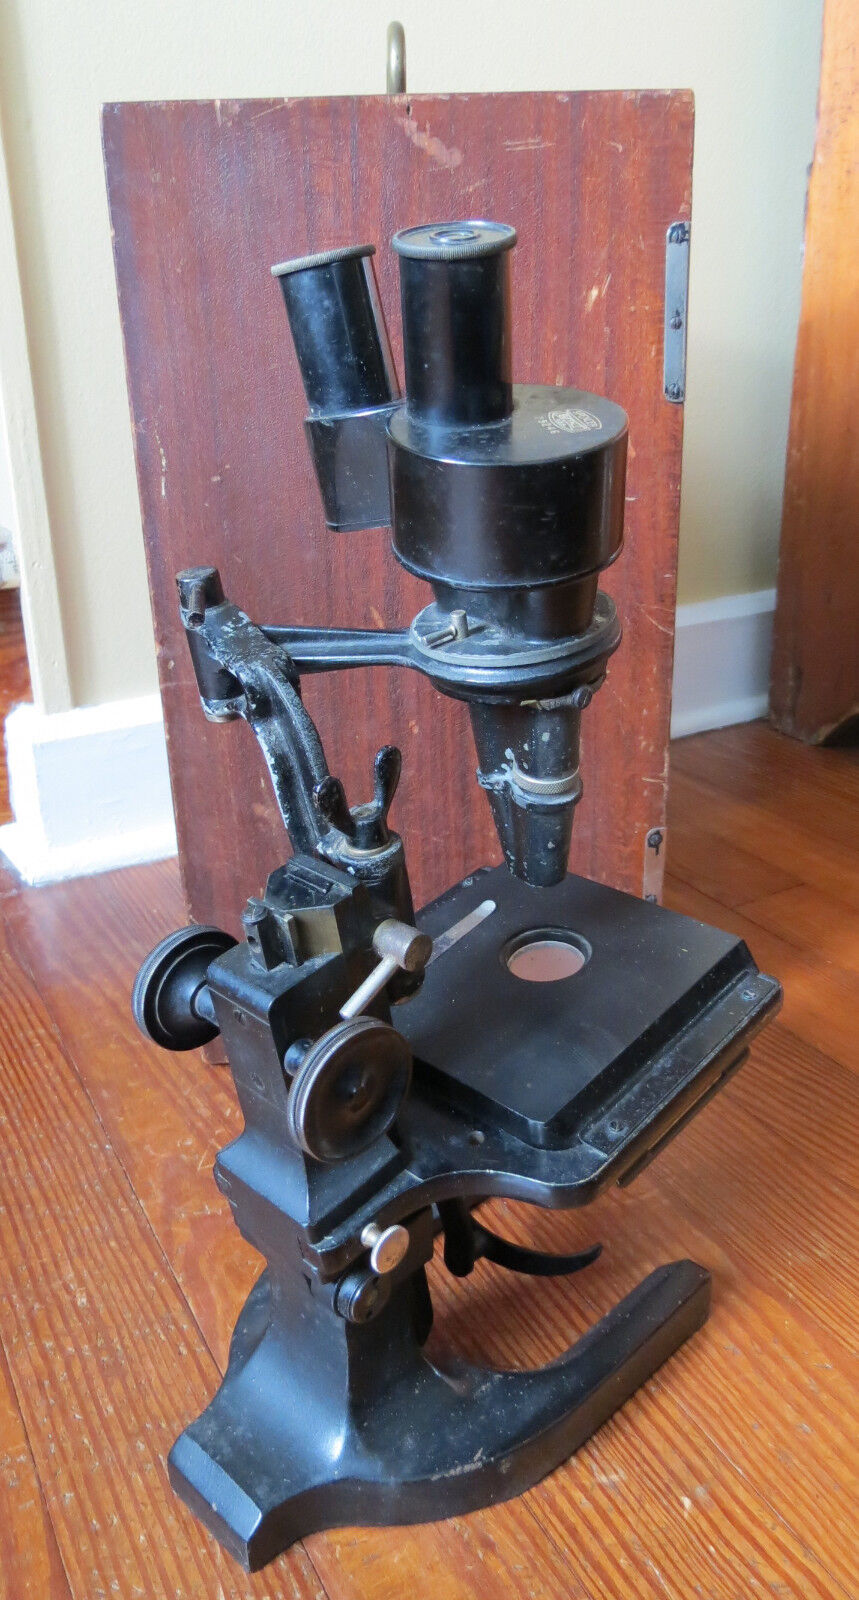 VINTAGE SPENCER STEREOSCOPIC MICROSCOPE WITH WOODEN CASE